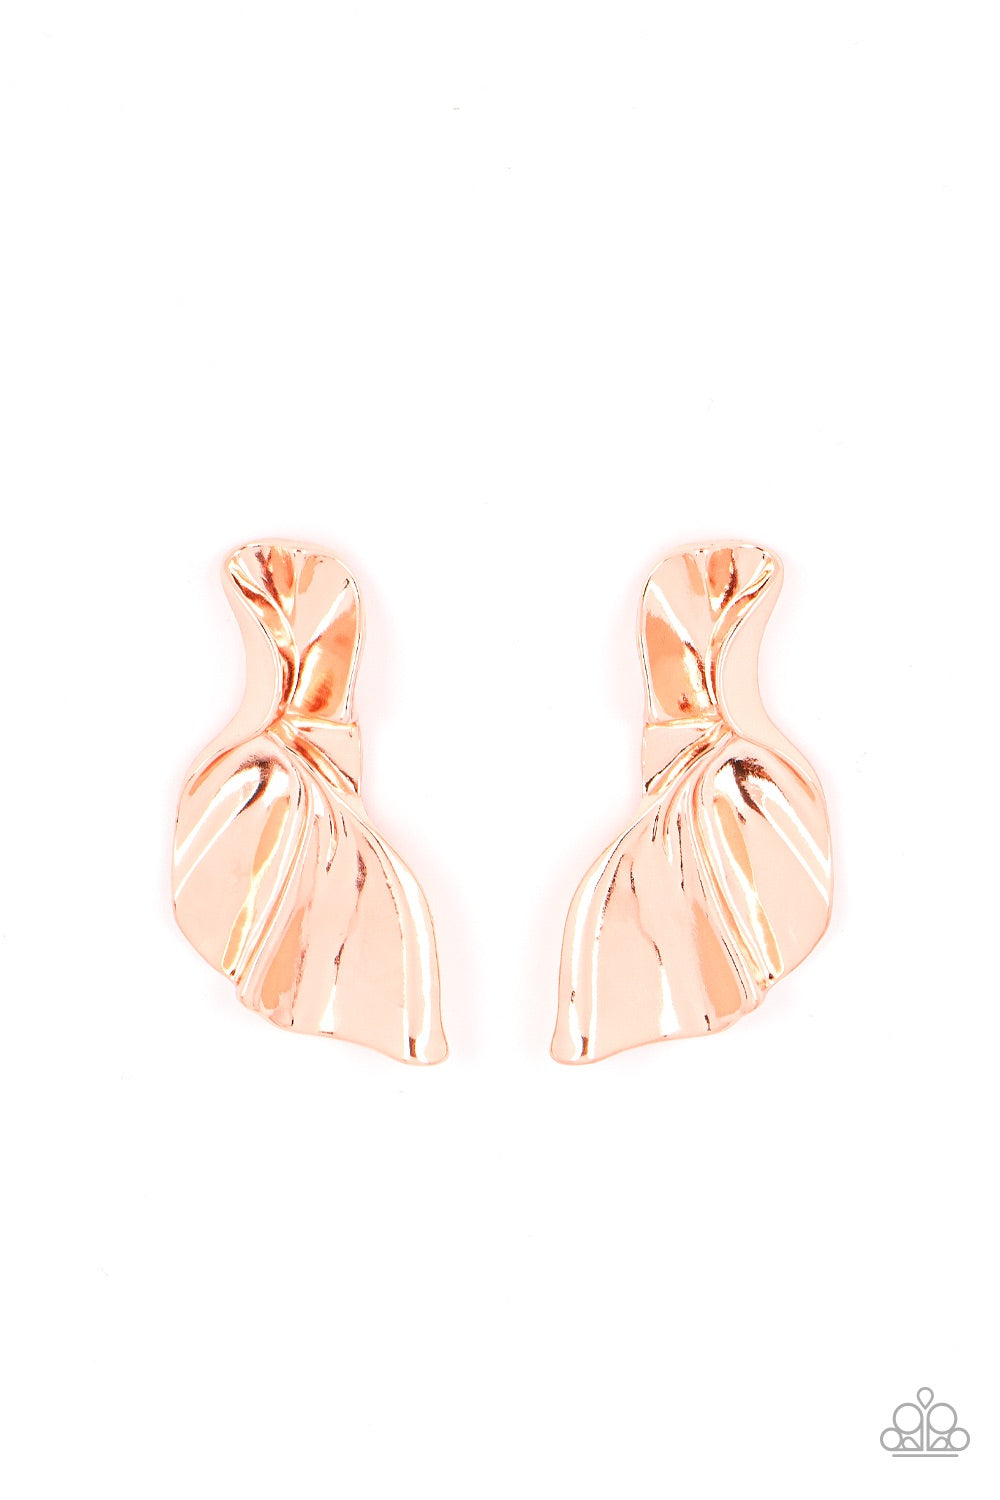 Paparazzi METAL-Physical Mood - Copper Earring - A Finishing Touch Jewelry